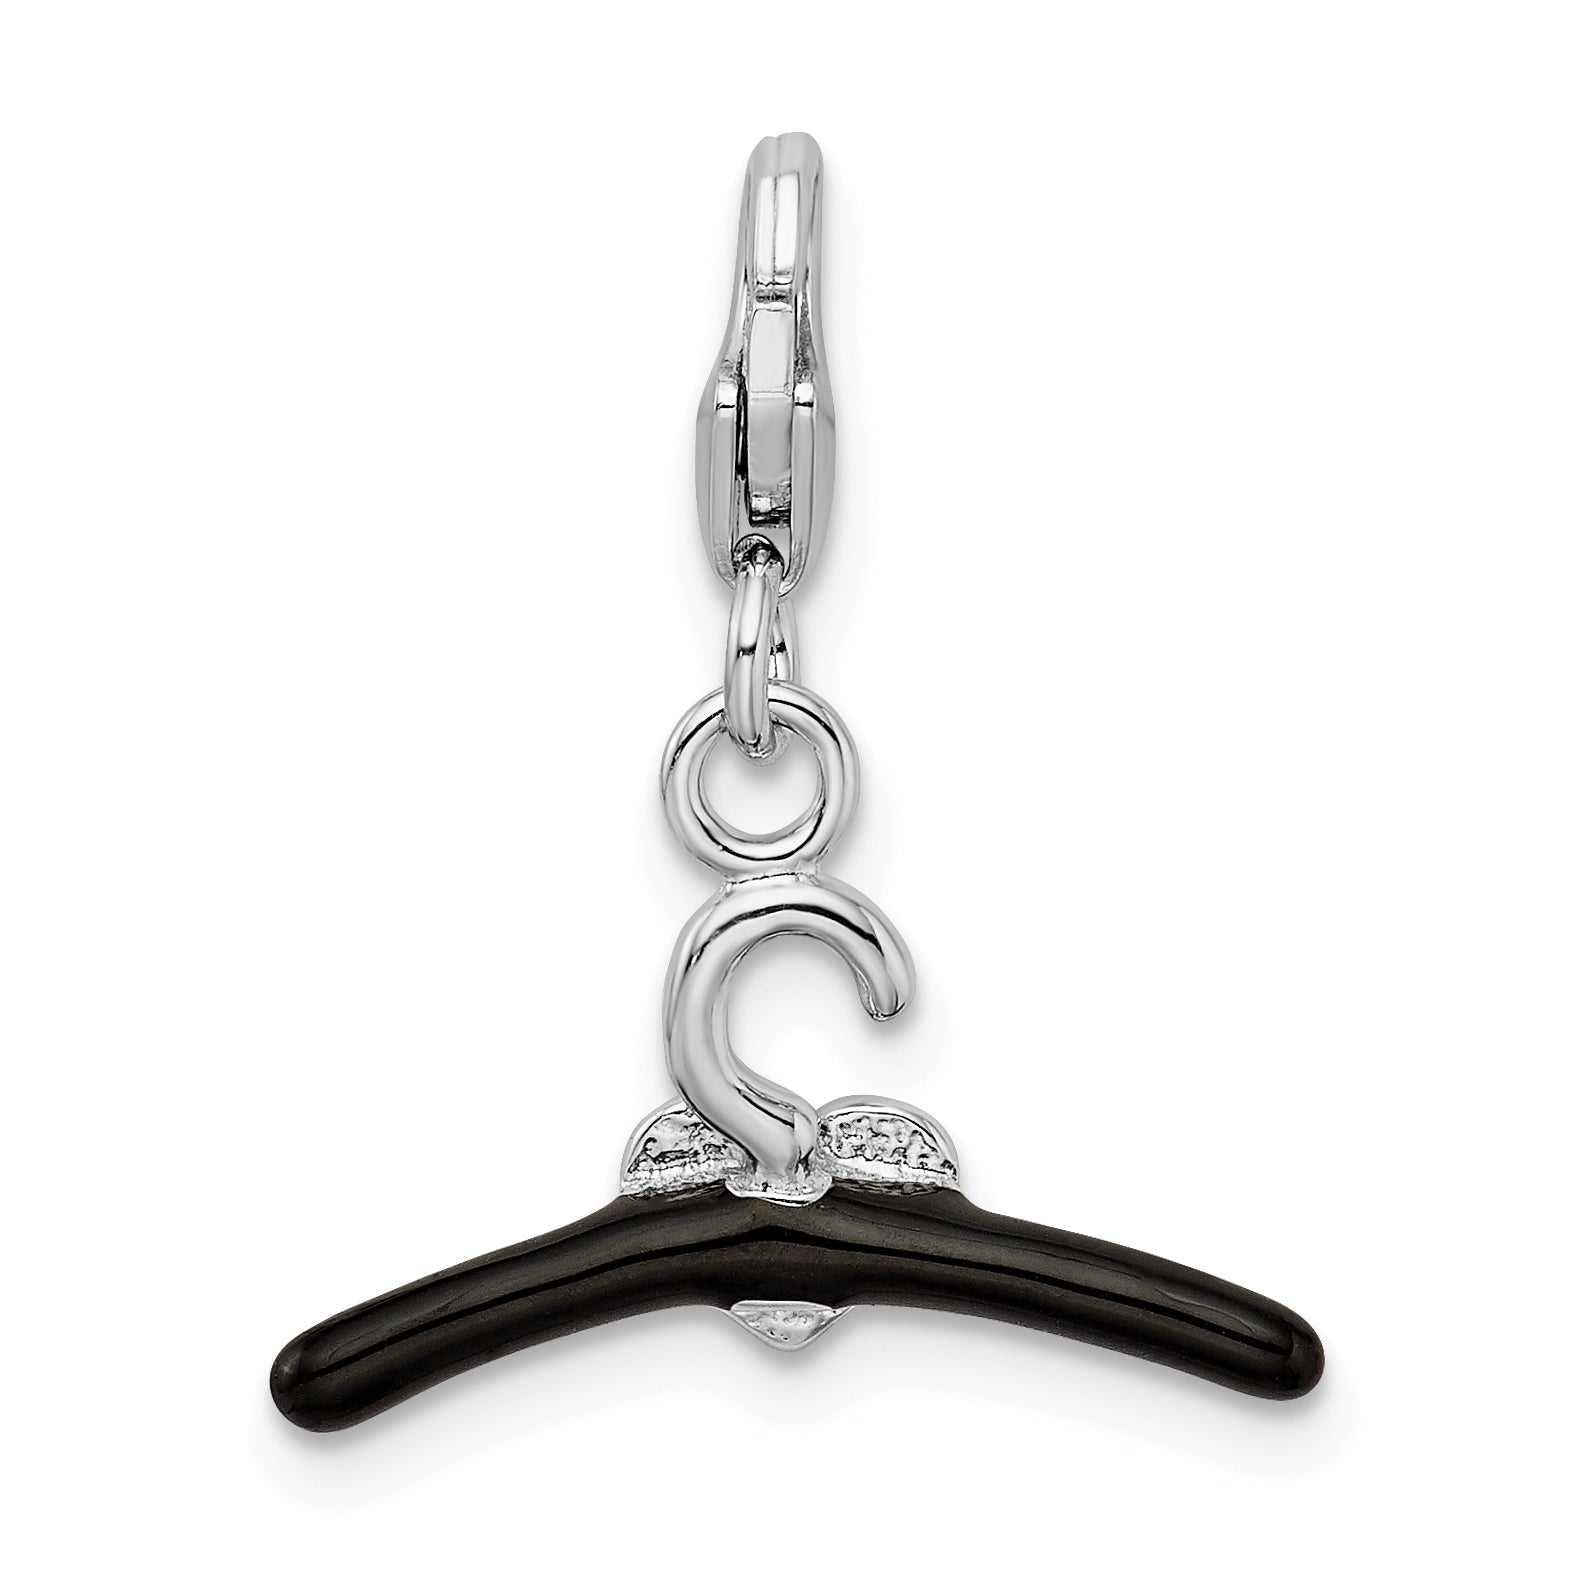 Amore La Vita Sterling Silver Rhodium-plated Polished 3-D Black and Red Enameled Heart Hanger Charm with Fancy Lobster Clasp